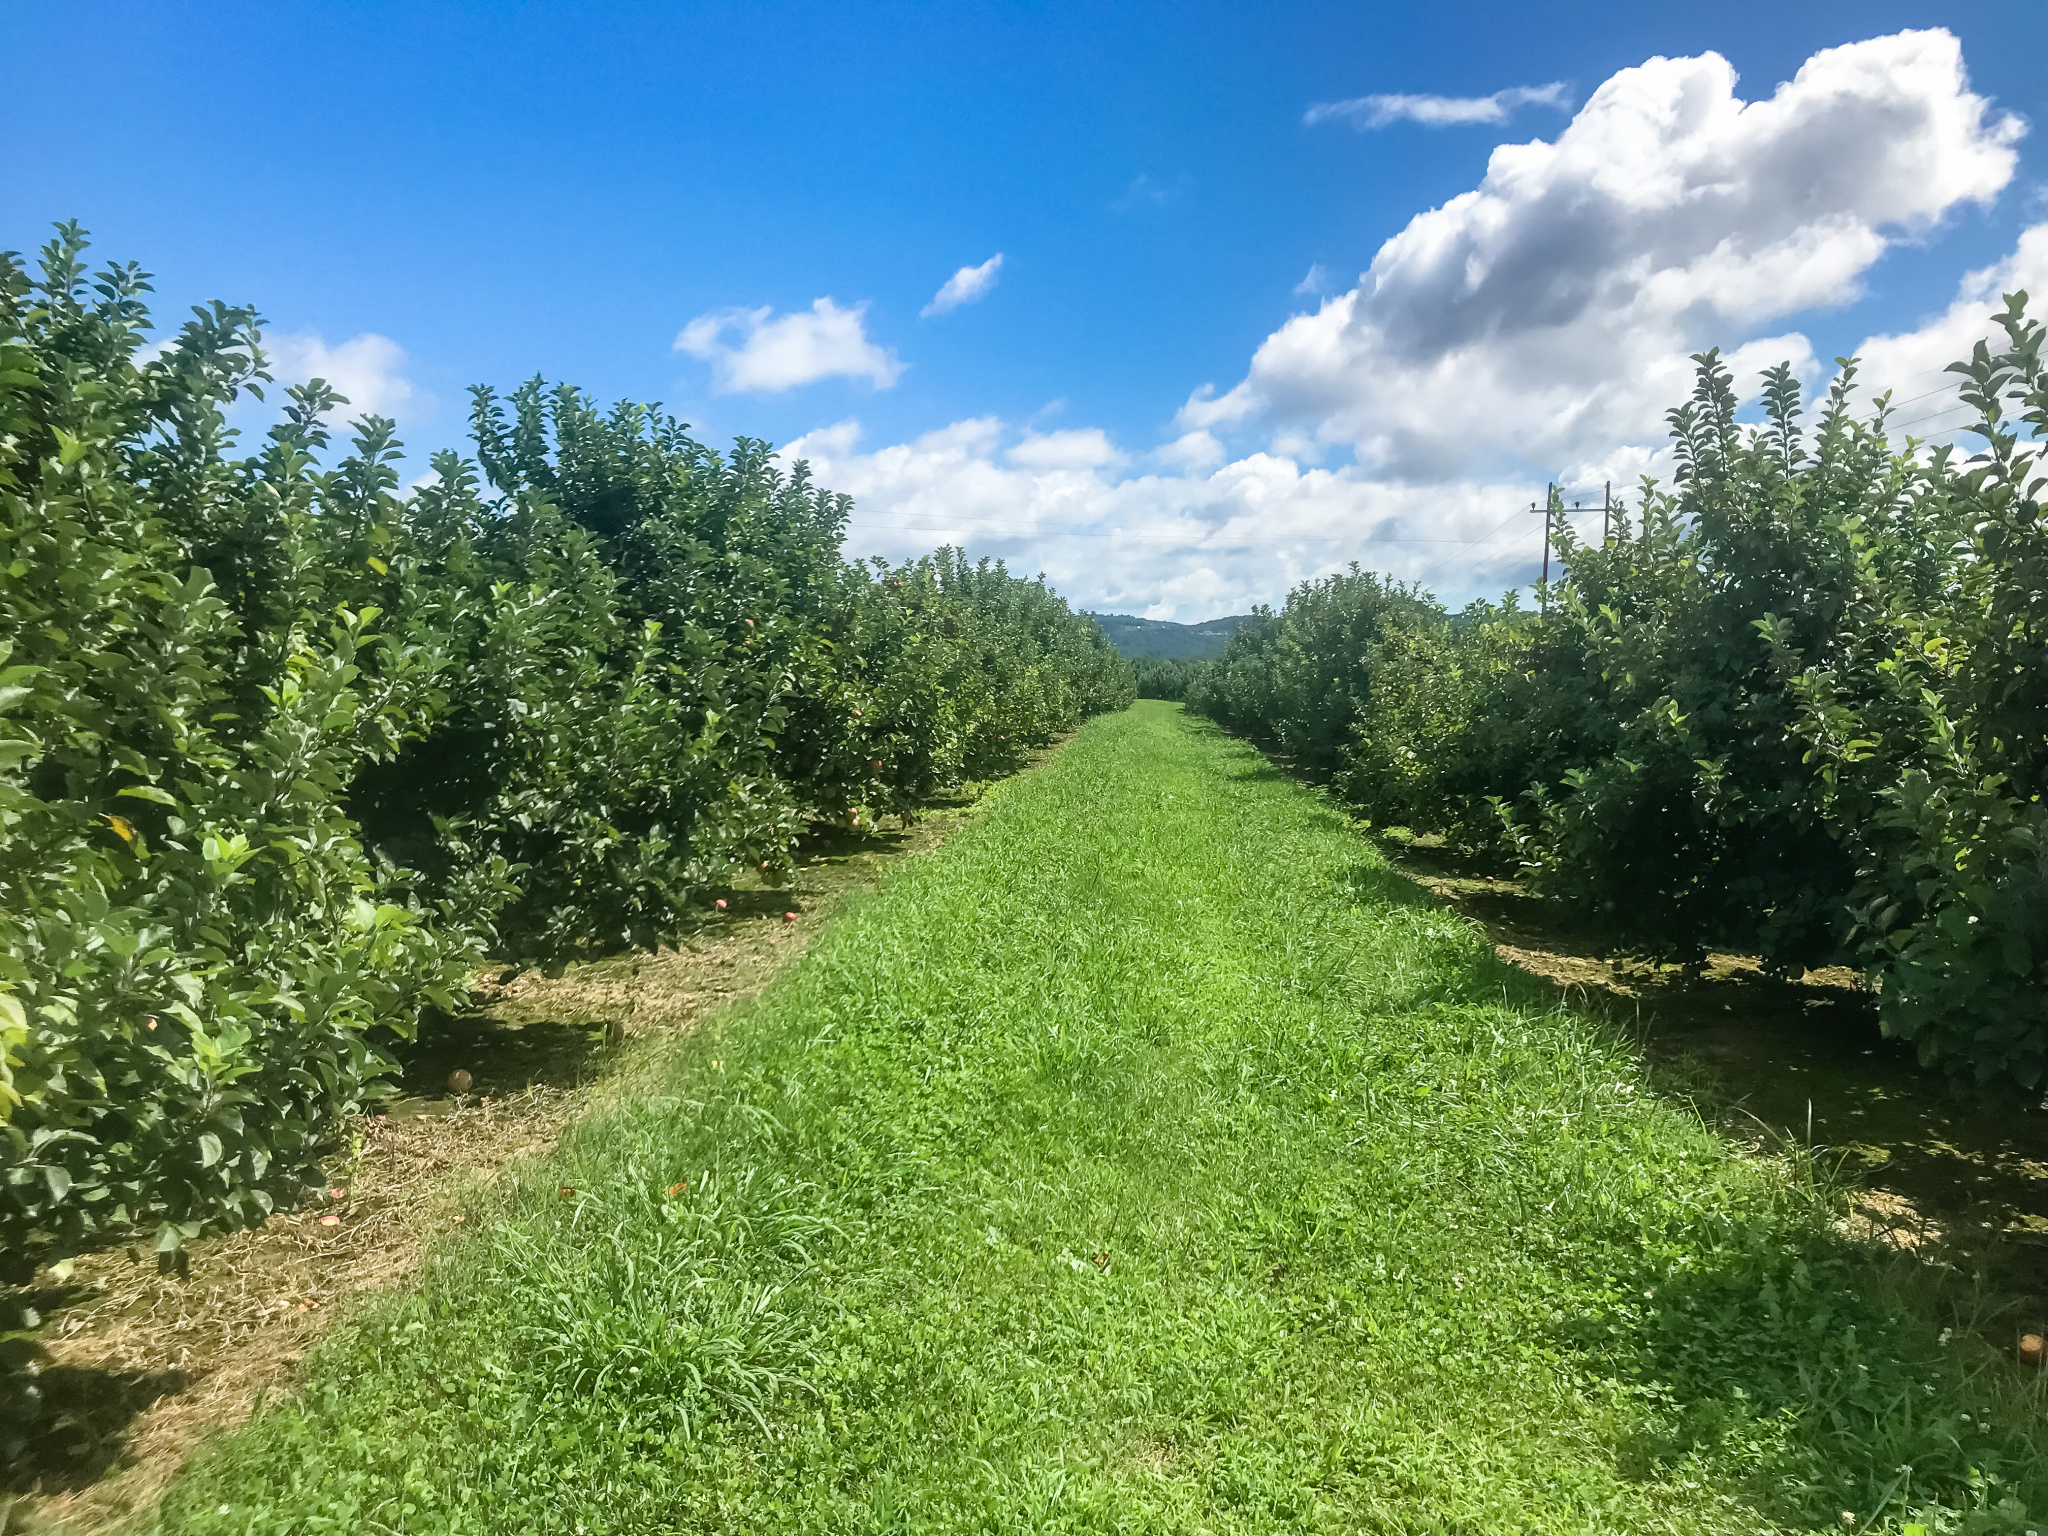 Around Greenville: You-Pick Apple Orchards - BJUtoday